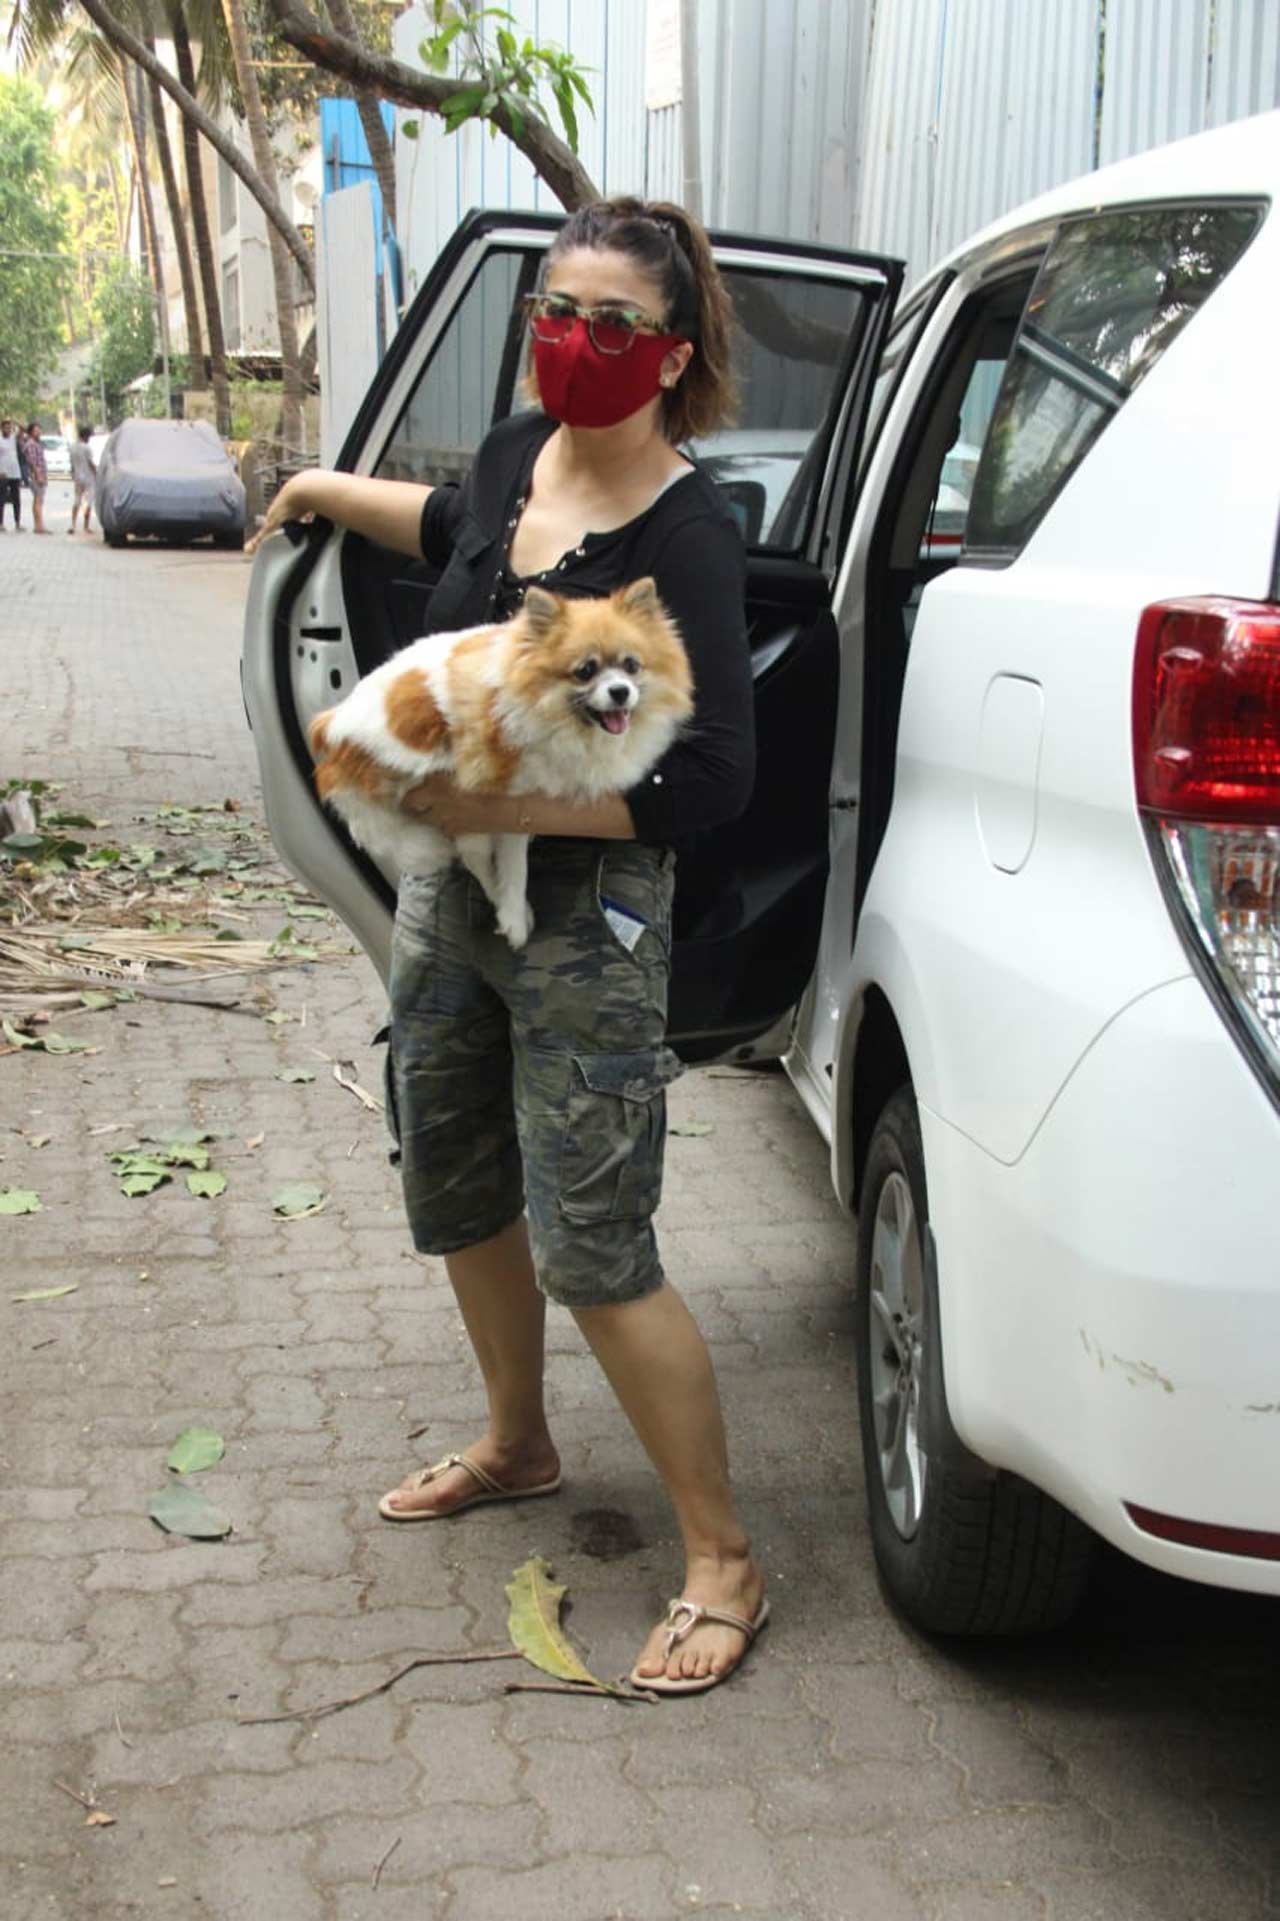 Raveena Tandon Thadani was spotted with her pet dog at a veterinary clinic in Bandra. The animal lover appeared to be anxious about the pooch’s well-being.